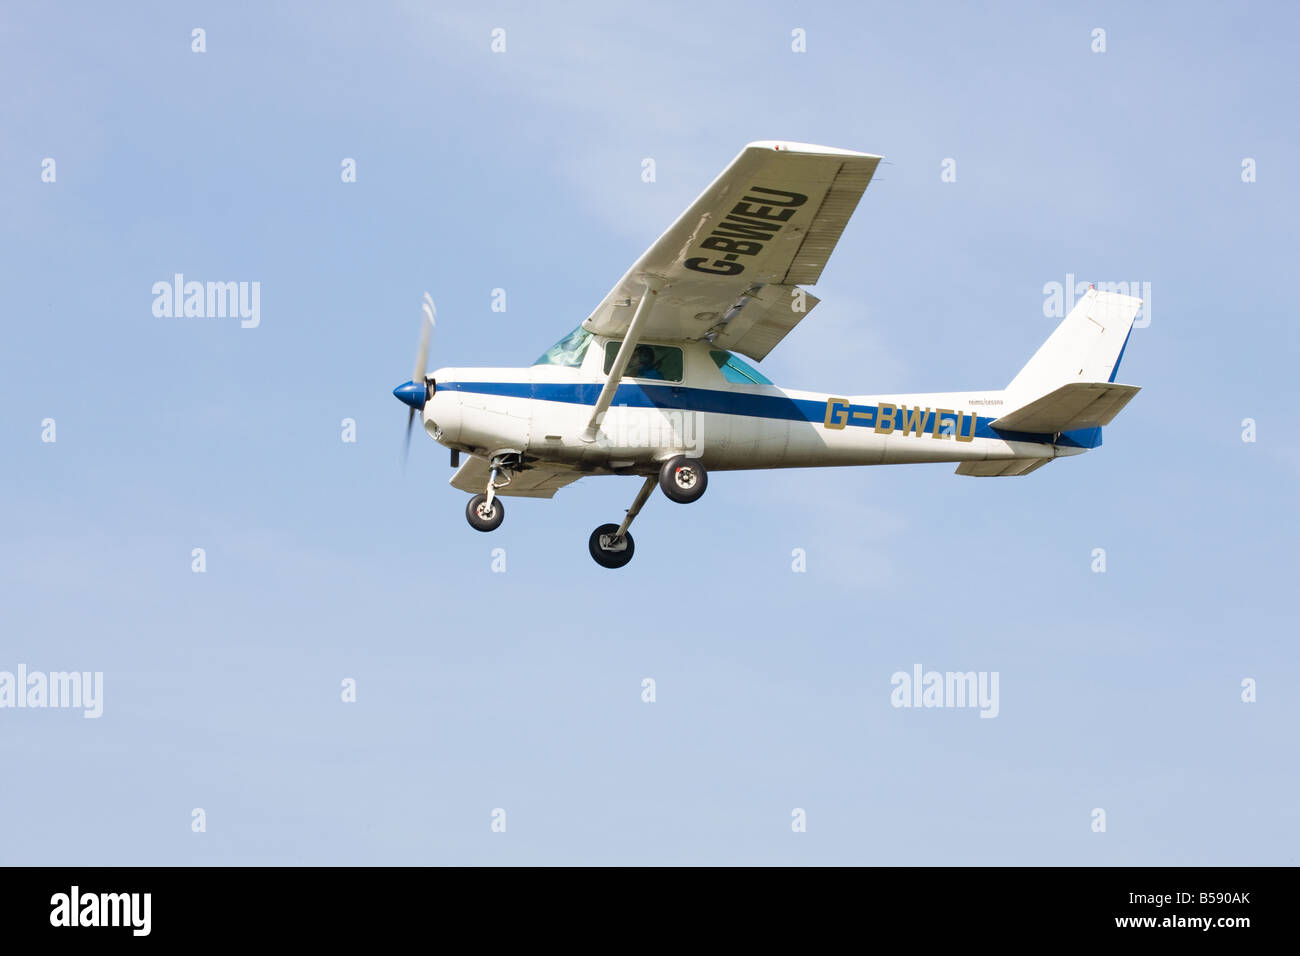 Reims Cessna 152 G-BWEU in flight on final approach to land at Sandtoft Airfield Stock Photo